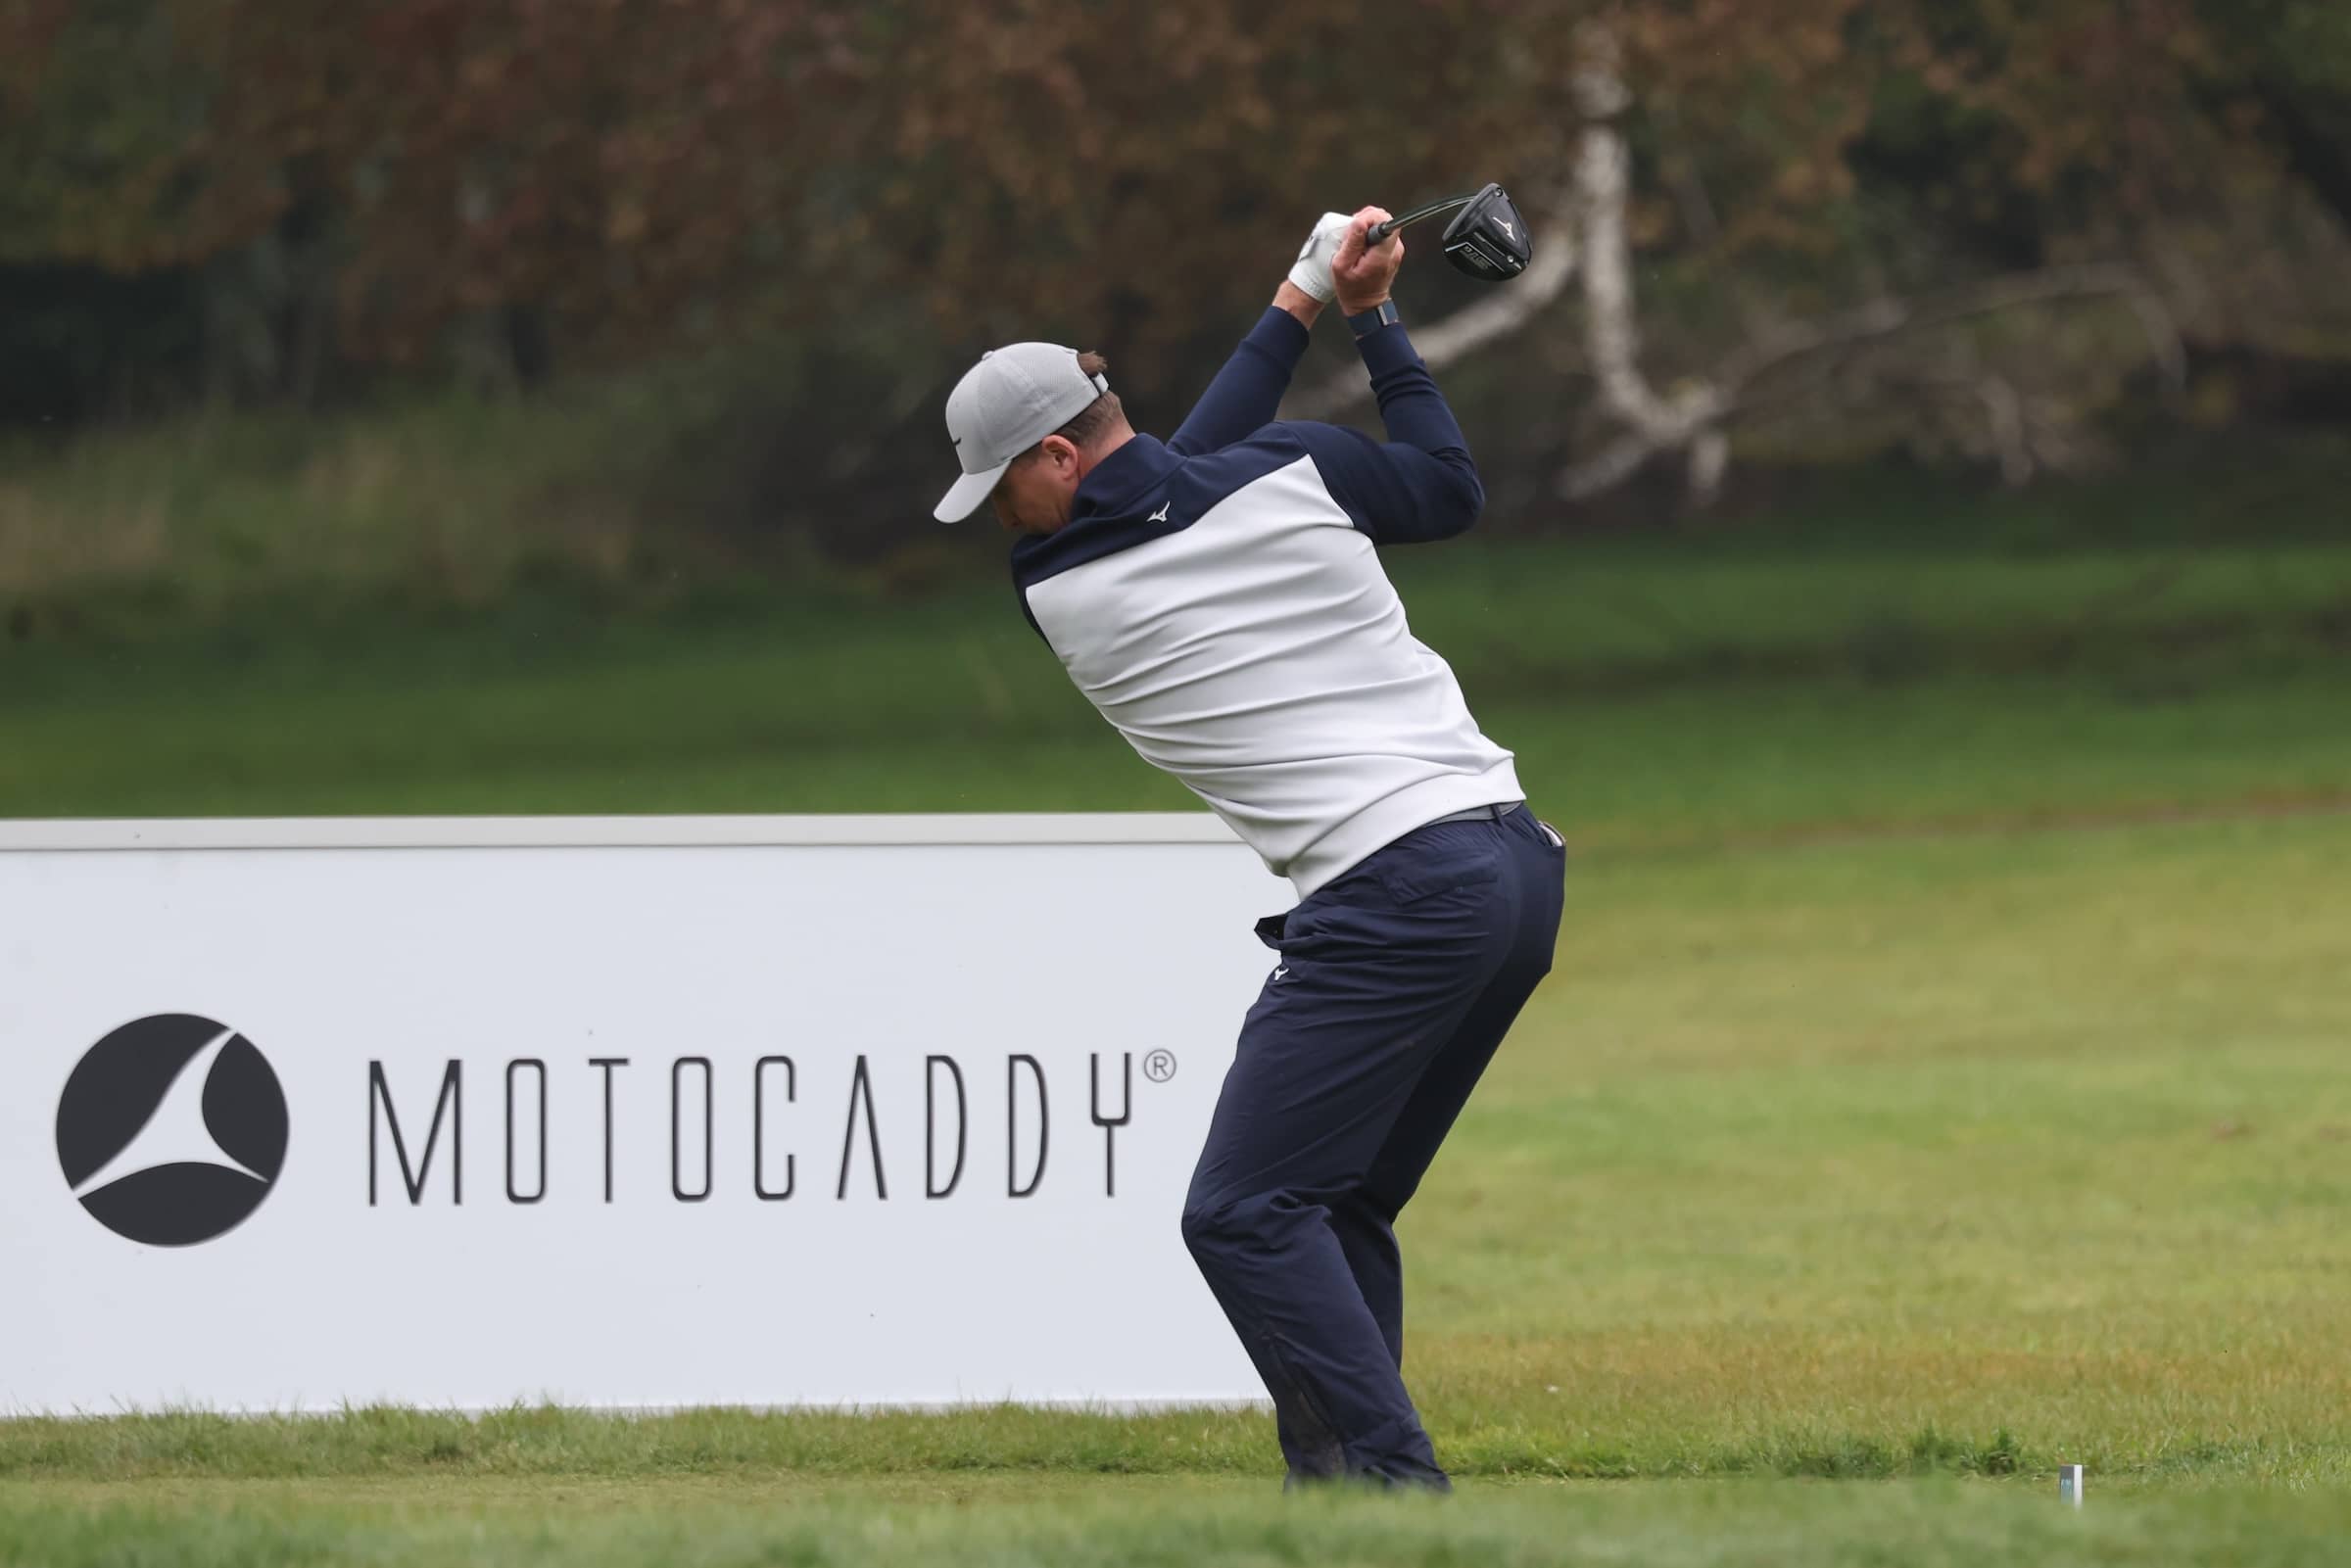 OJ Farrell strikes ball with Motocaddy sign in background